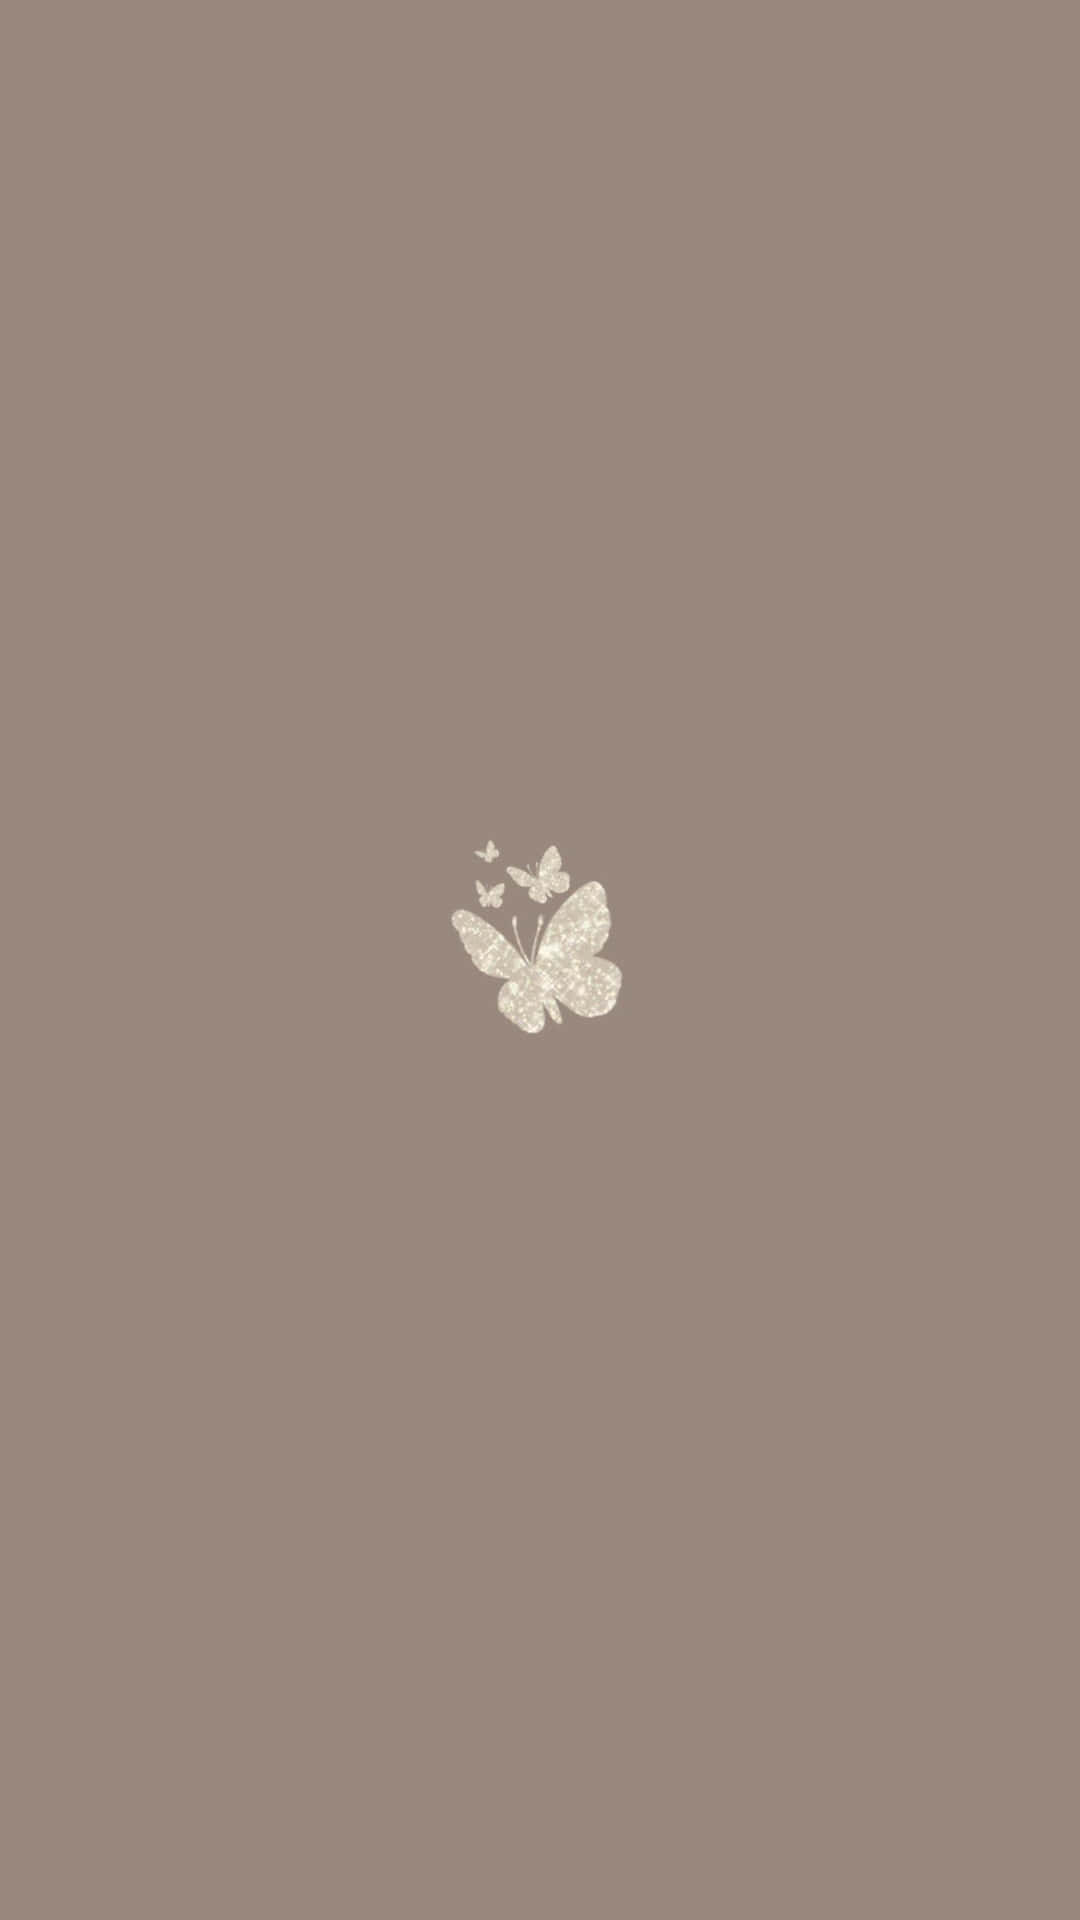 A White Butterfly On A Brown Background Wallpaper